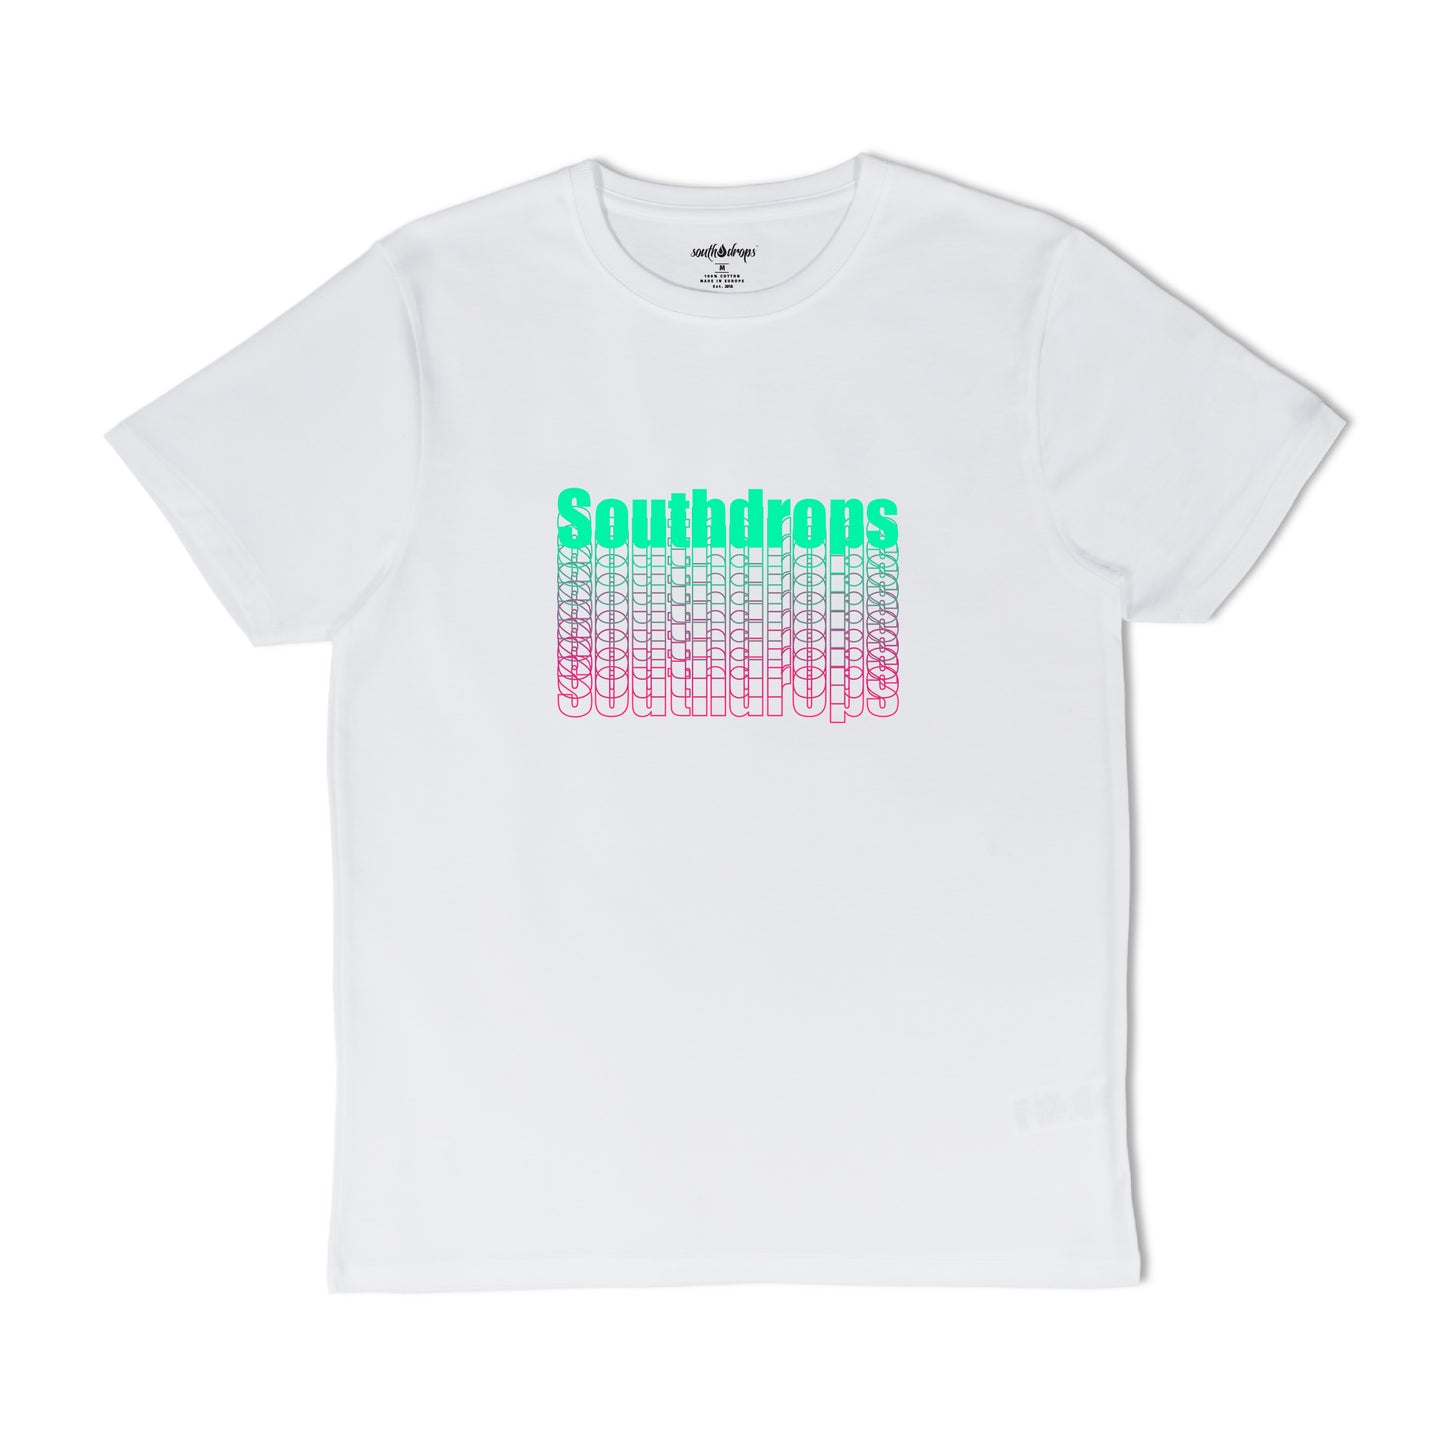 Southdroppers - Essential Tee